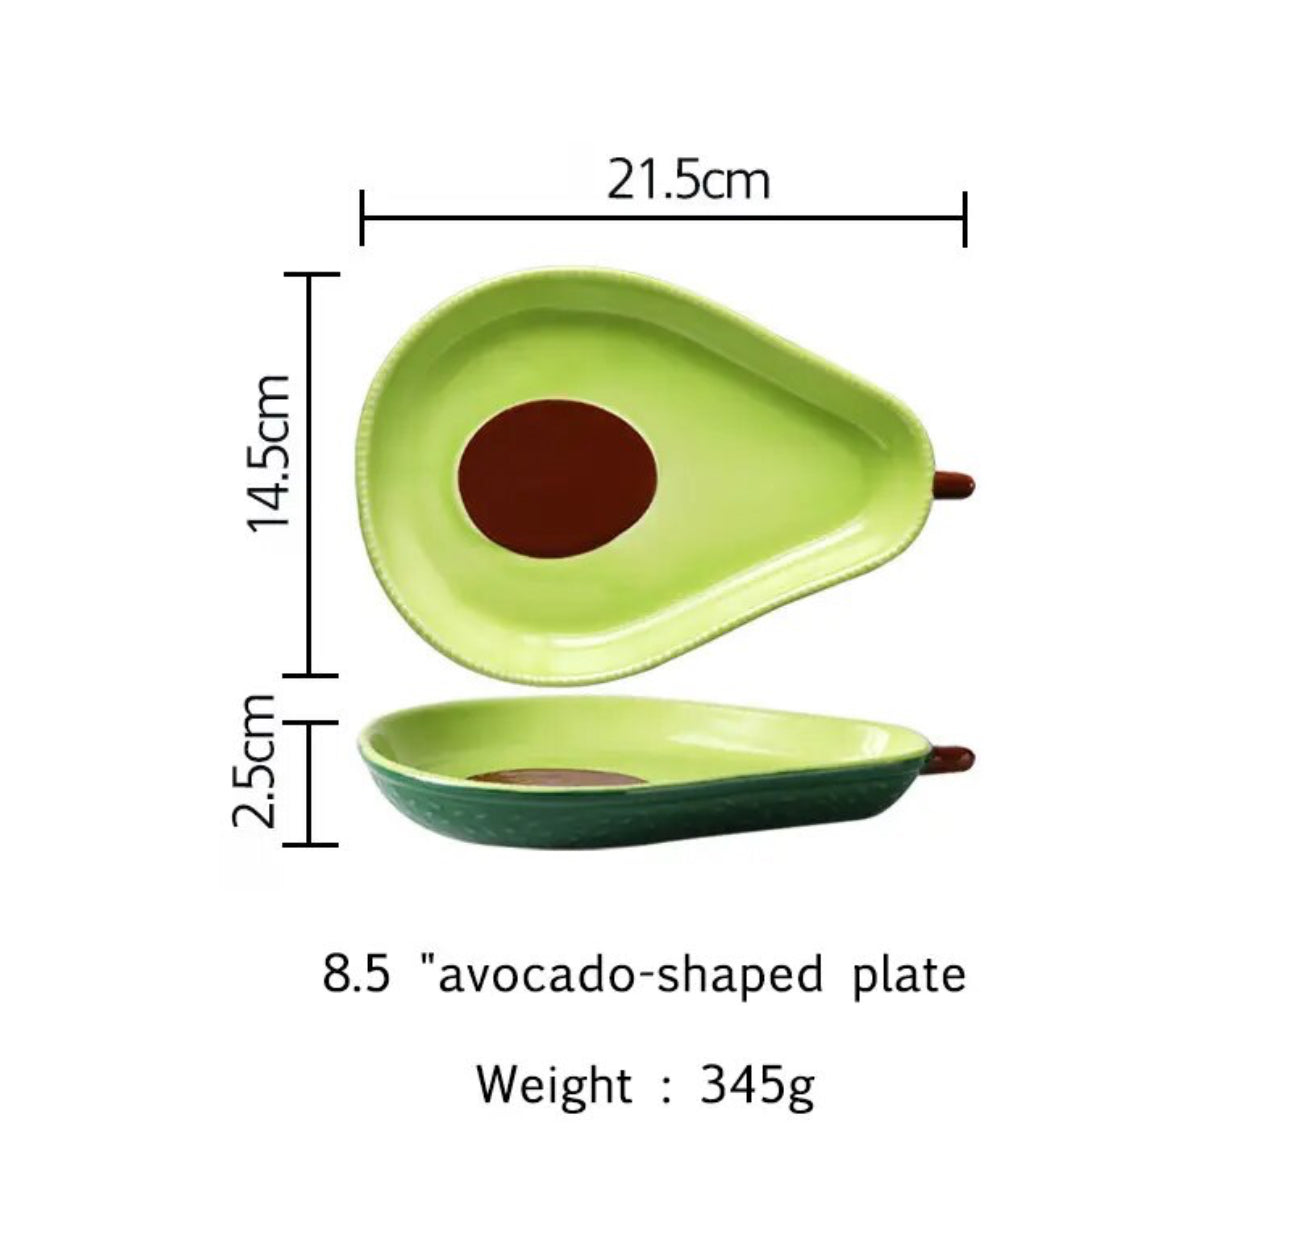 The Avocado Dishes